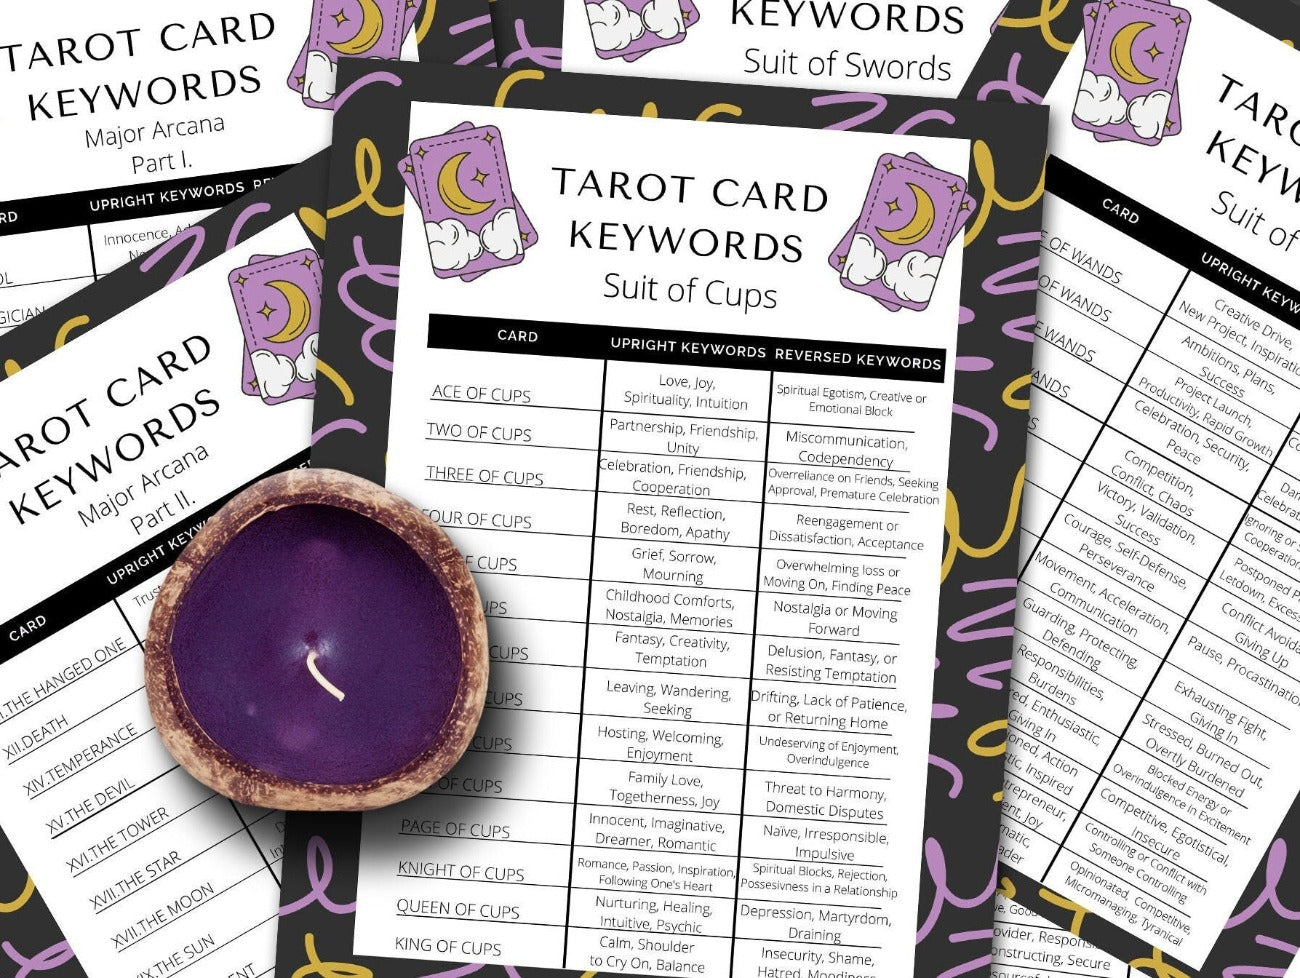 TAROT CHEAT SHEETS 5 Pages, Witchcraft Wicca 78 tarot card quick guide printable, Tarot beginner keywords reference Guide, Learn the Tarot - Morgana Magick Spell